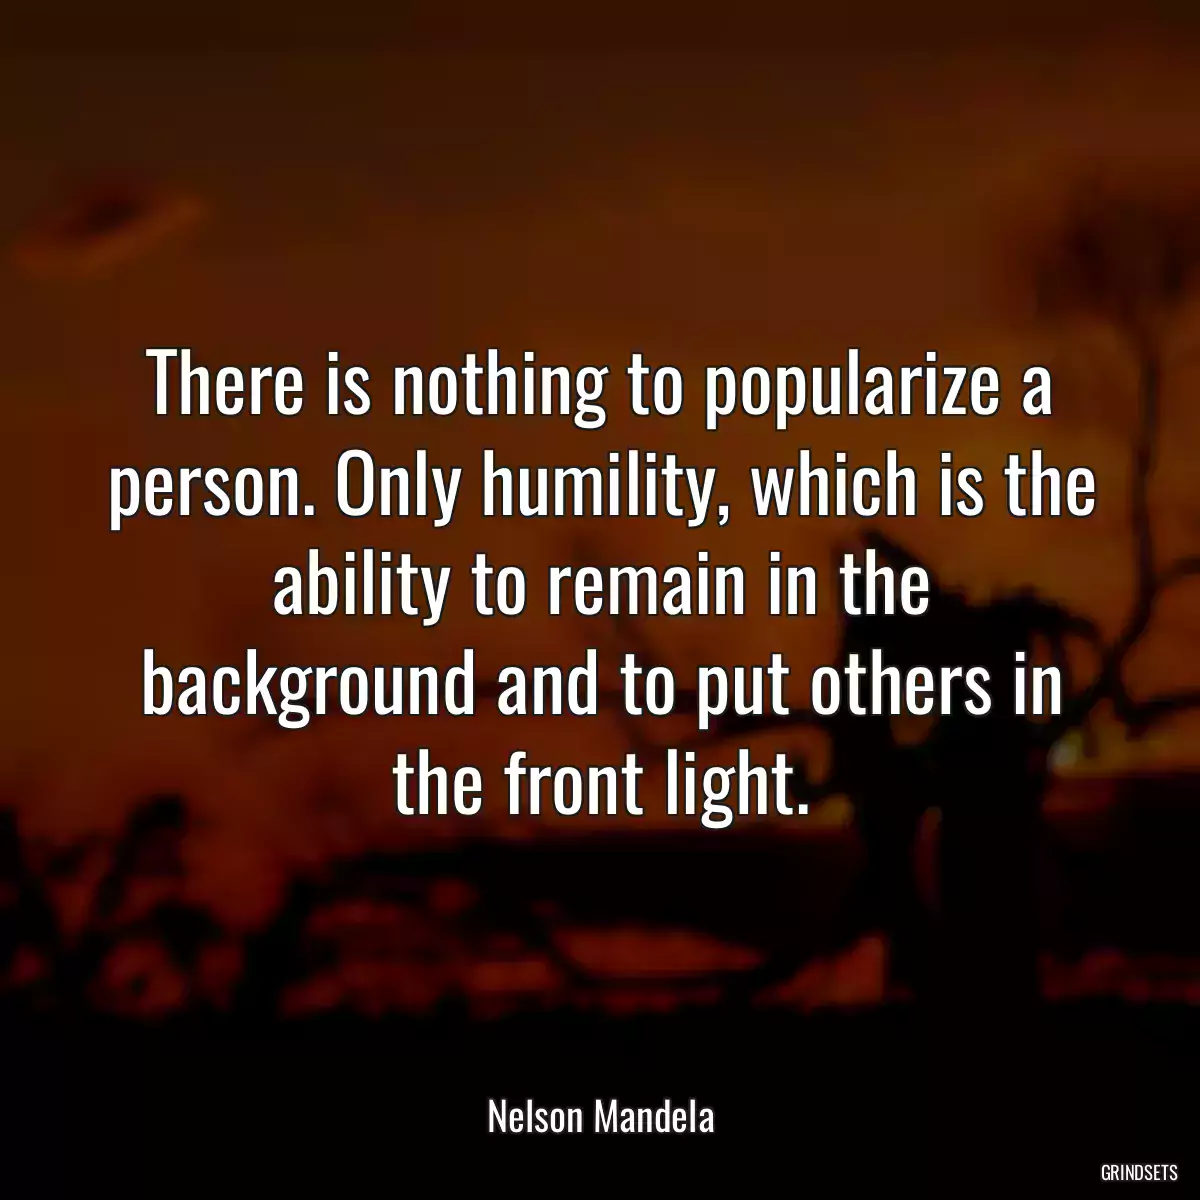 There is nothing to popularize a person. Only humility, which is the ability to remain in the background and to put others in the front light.